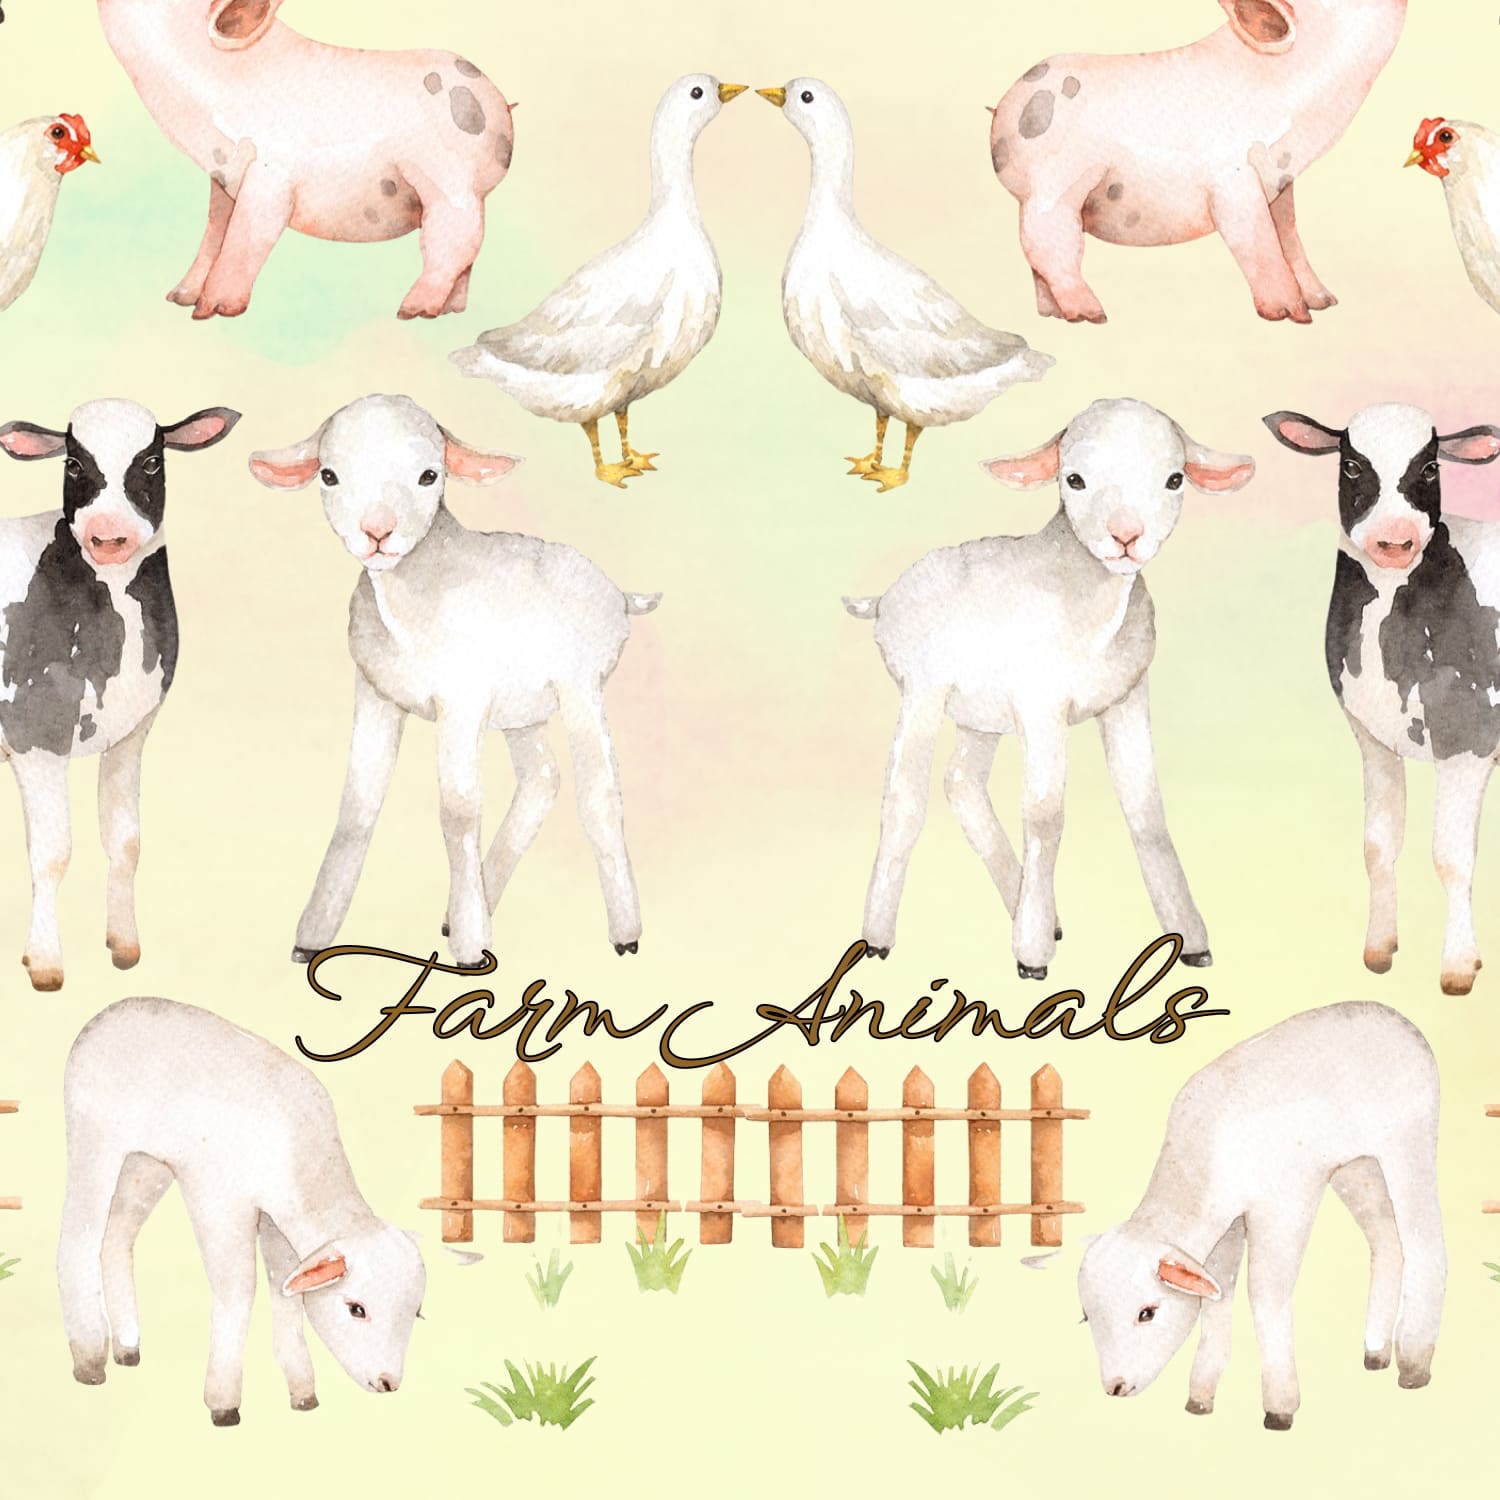 The set of high quality hand painted watercolor farms animals and elements.